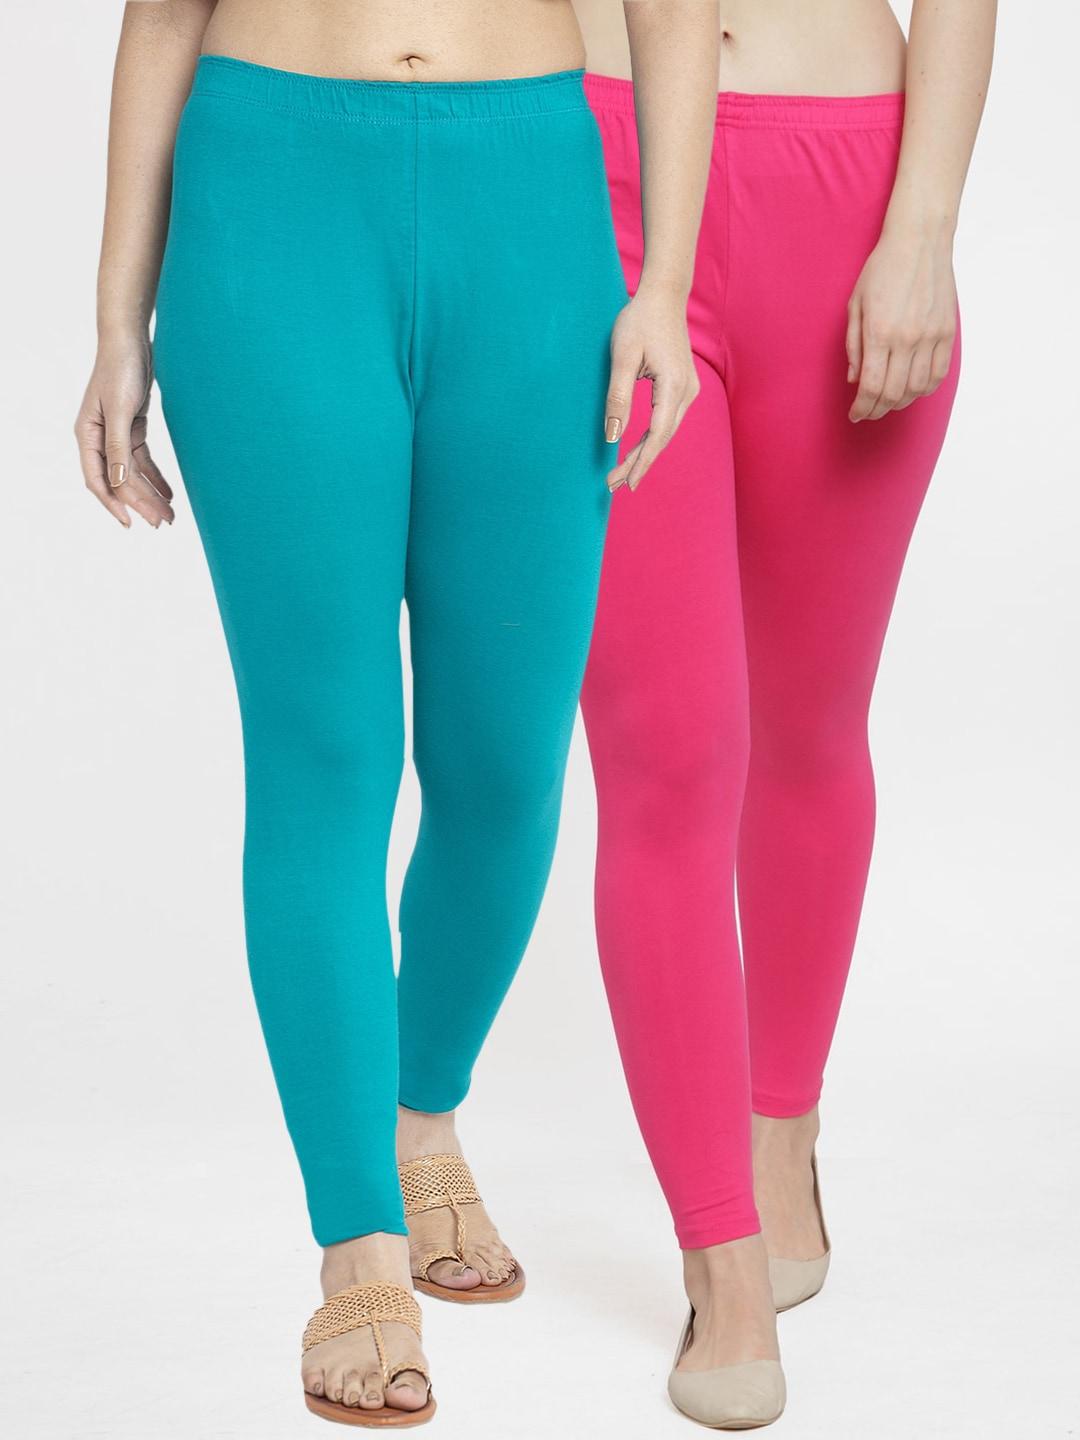 jinfo women pack of 2 solid pink & blue cotton leggings